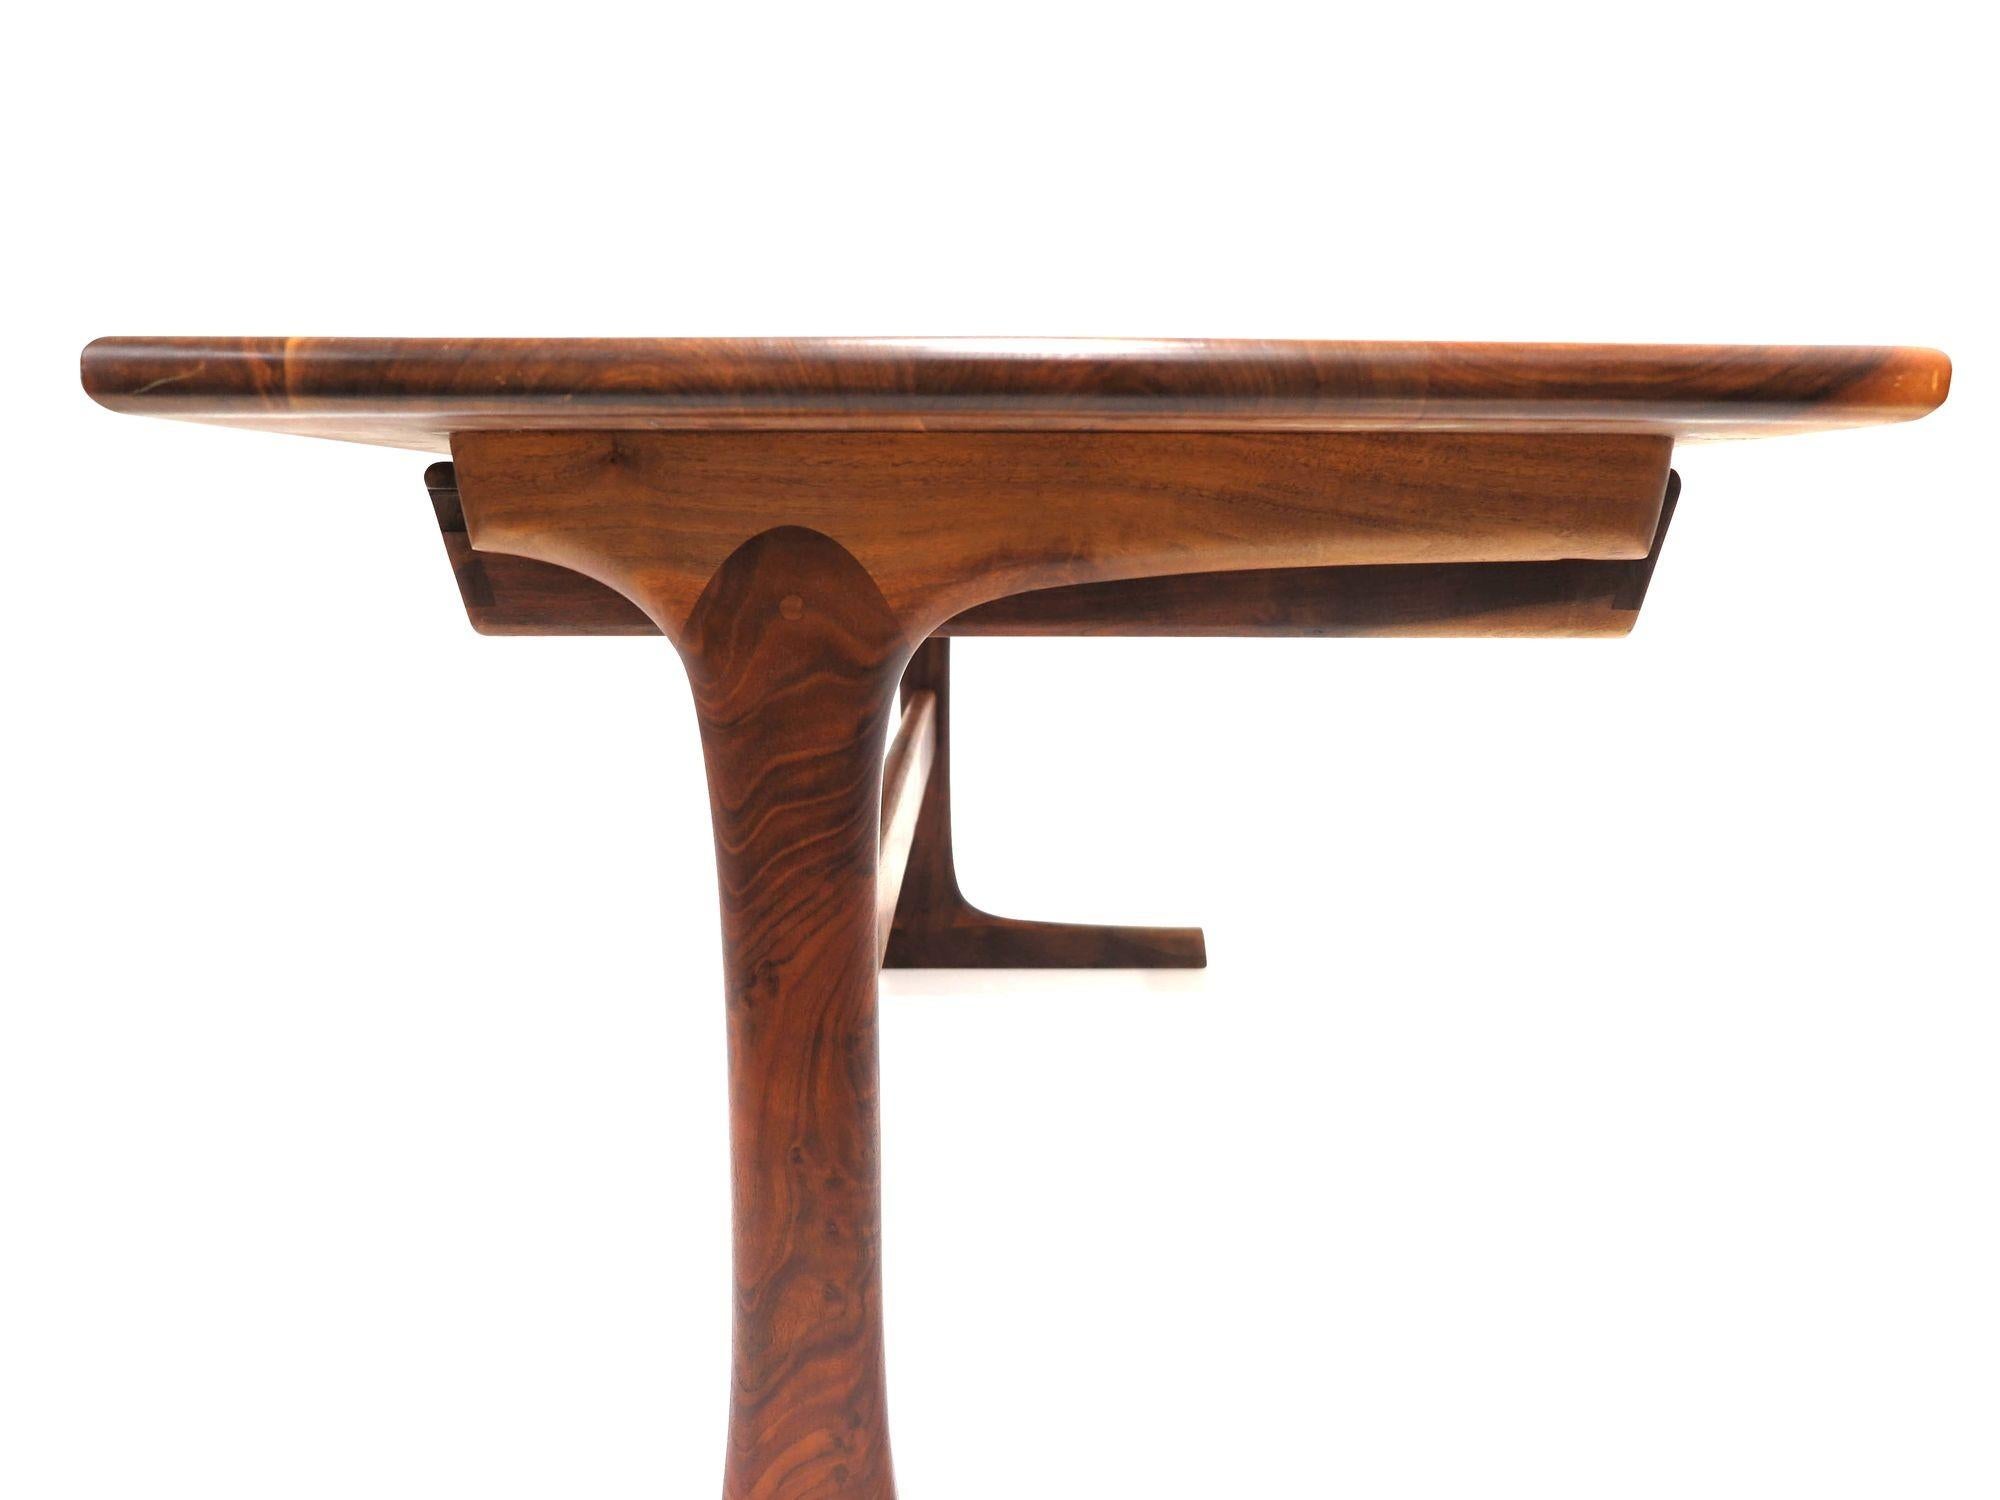 California studio desk handcrafted of solid black Walnut by Berkeley craftsman, Jim Sweeney. The desk features beautifully figured black walnut, two drawers with exposed joinery on sides, raised on sculptural pedestal base with cross stretcher. The